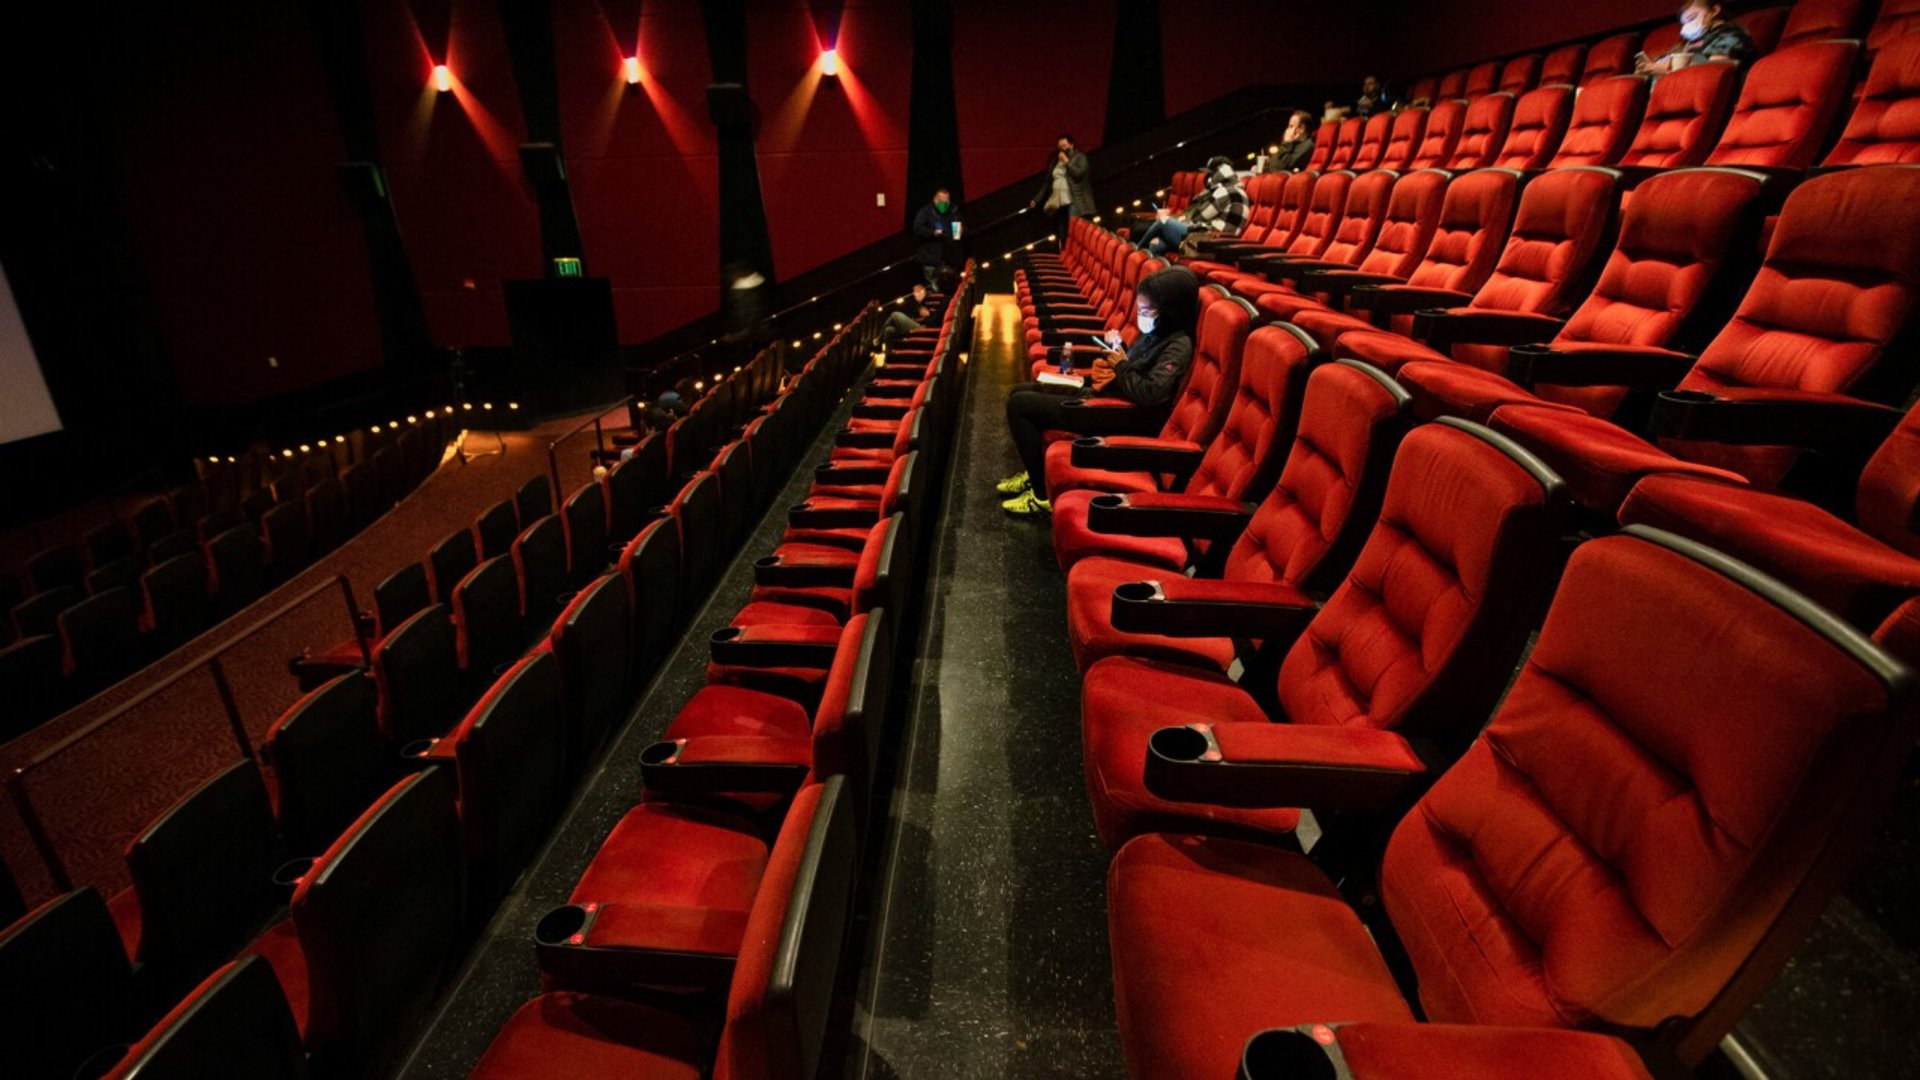 Amc The Grove 14 Theater In Los Angeles Ca Vendry